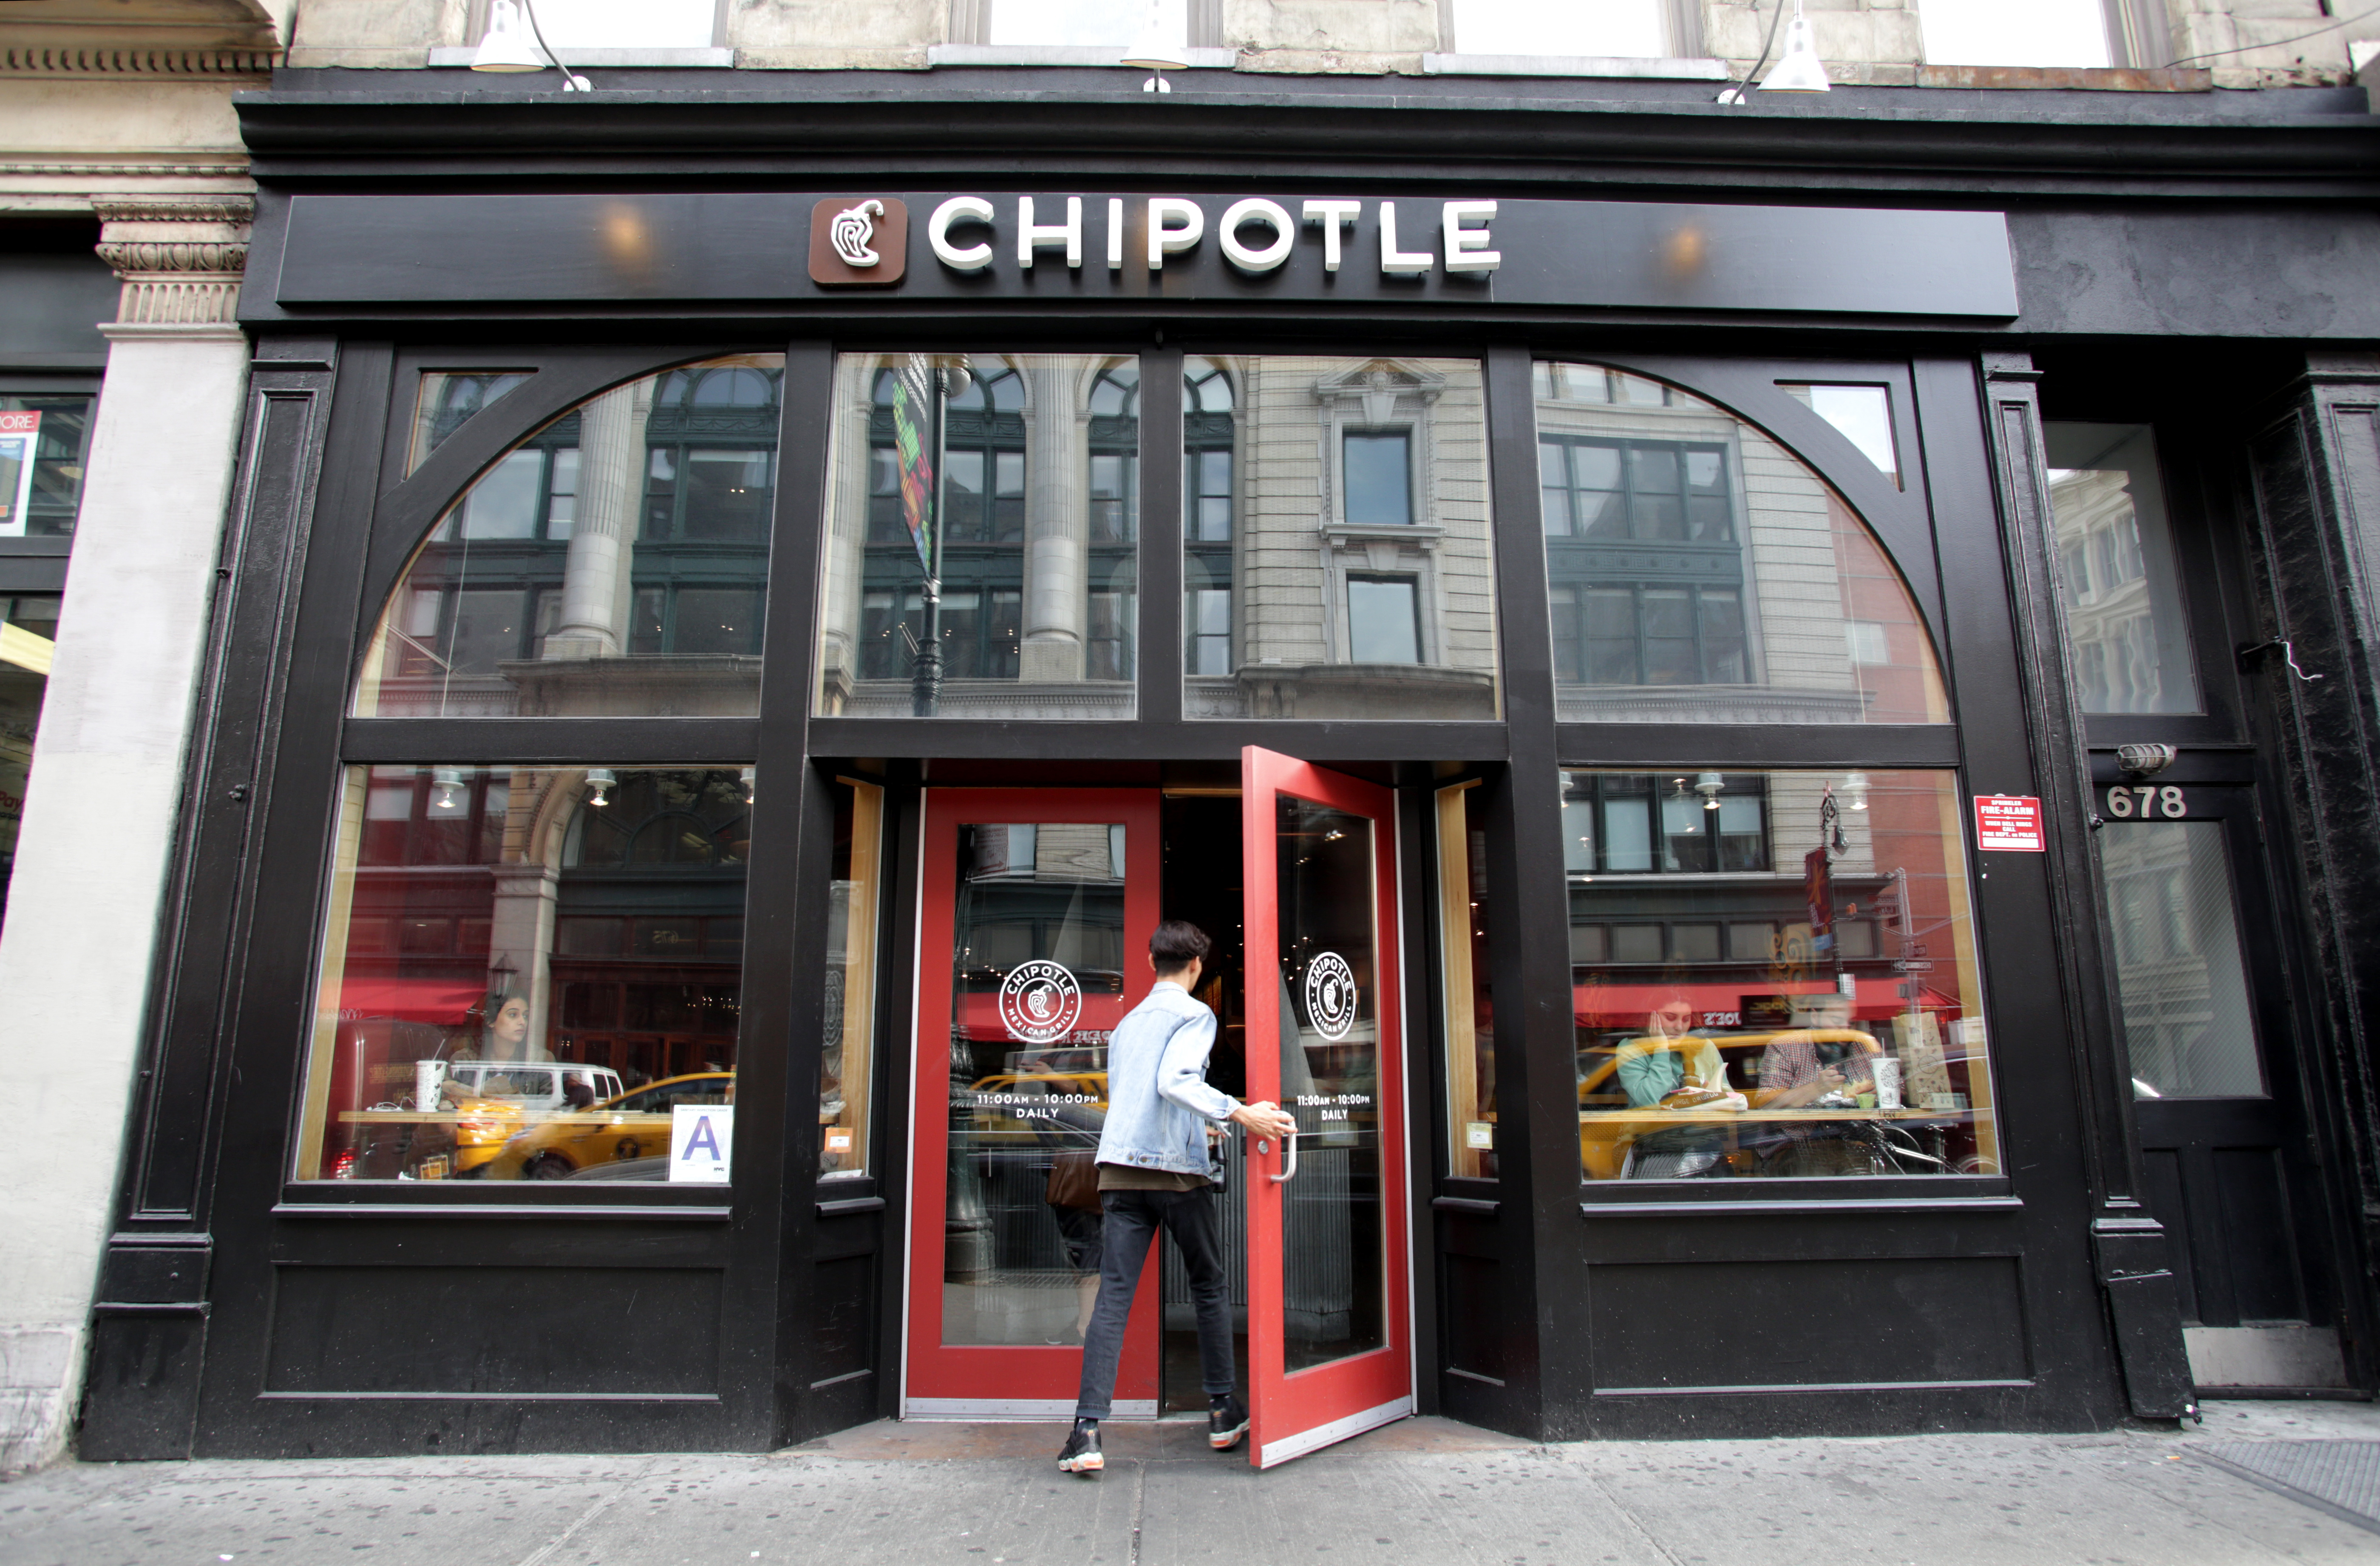 Omnichannel Initiatives and Food Service Market Research Drive Chipotle's Growth